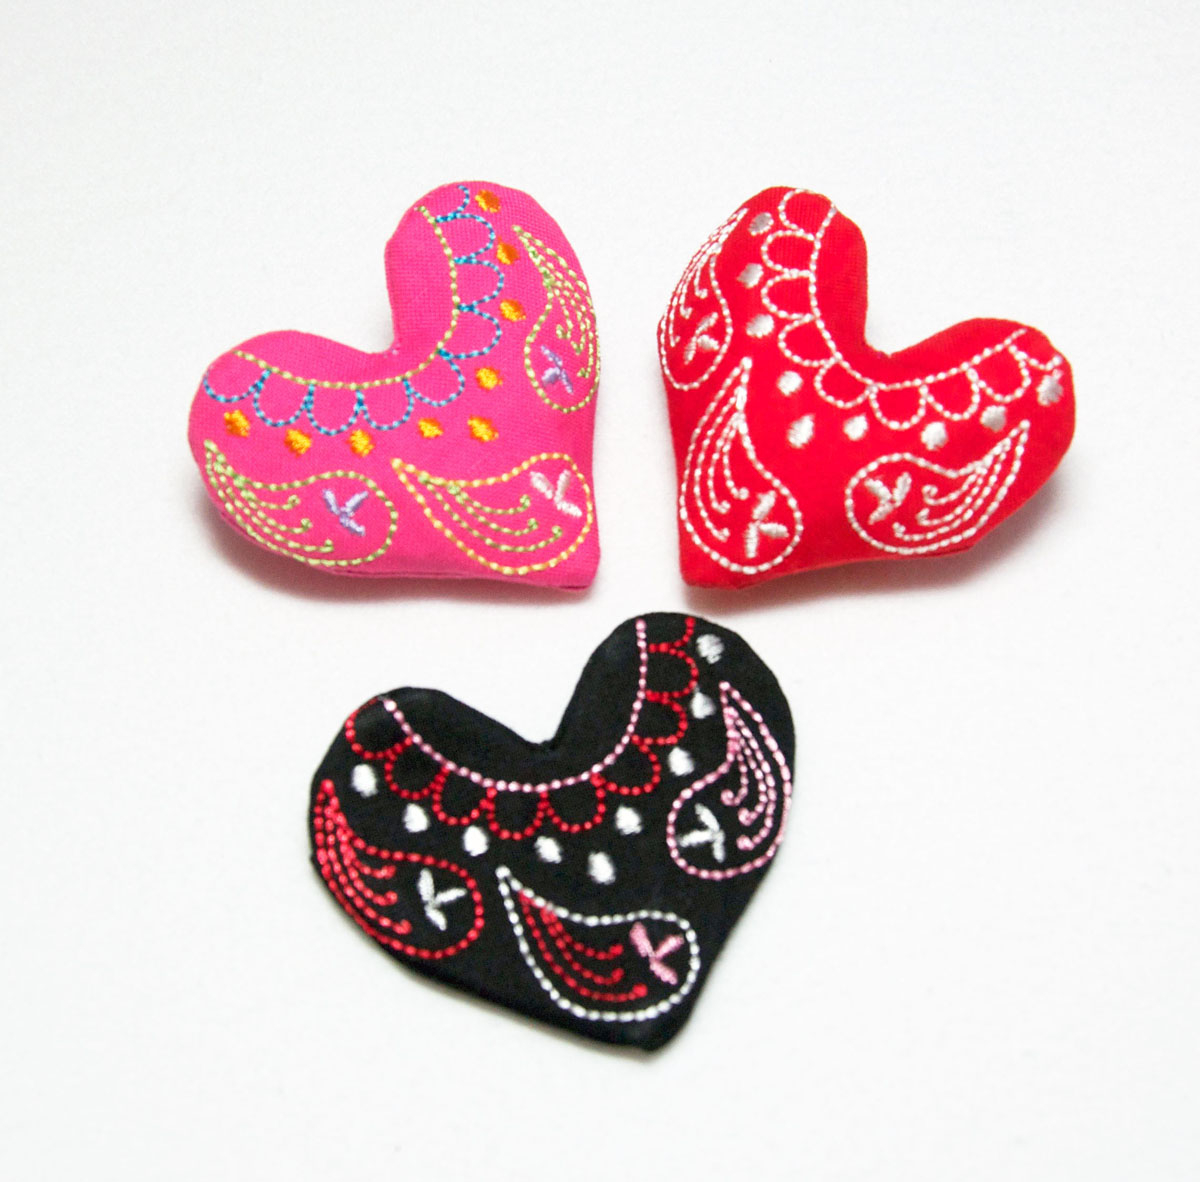 Embroidery Machine Patterns Free Embroidered Heart Pin And Free Embroidery Design Weallsew